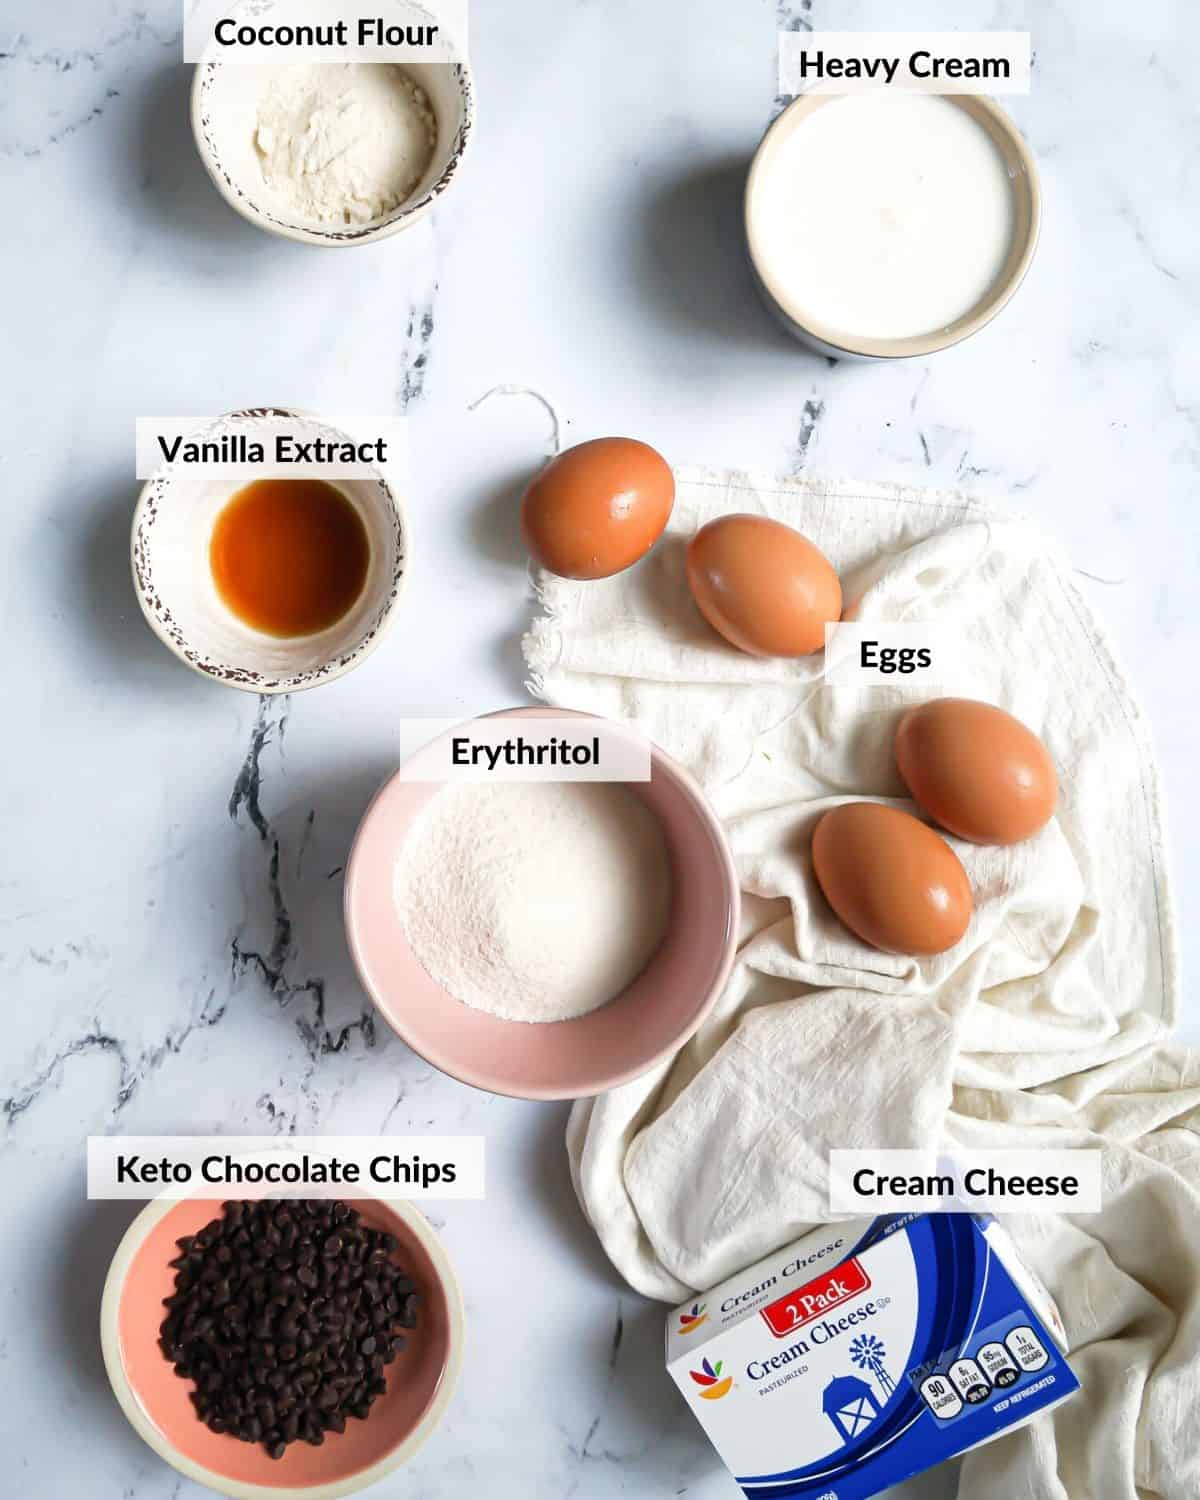 filling ingredients measured out into separate bowls on a counter